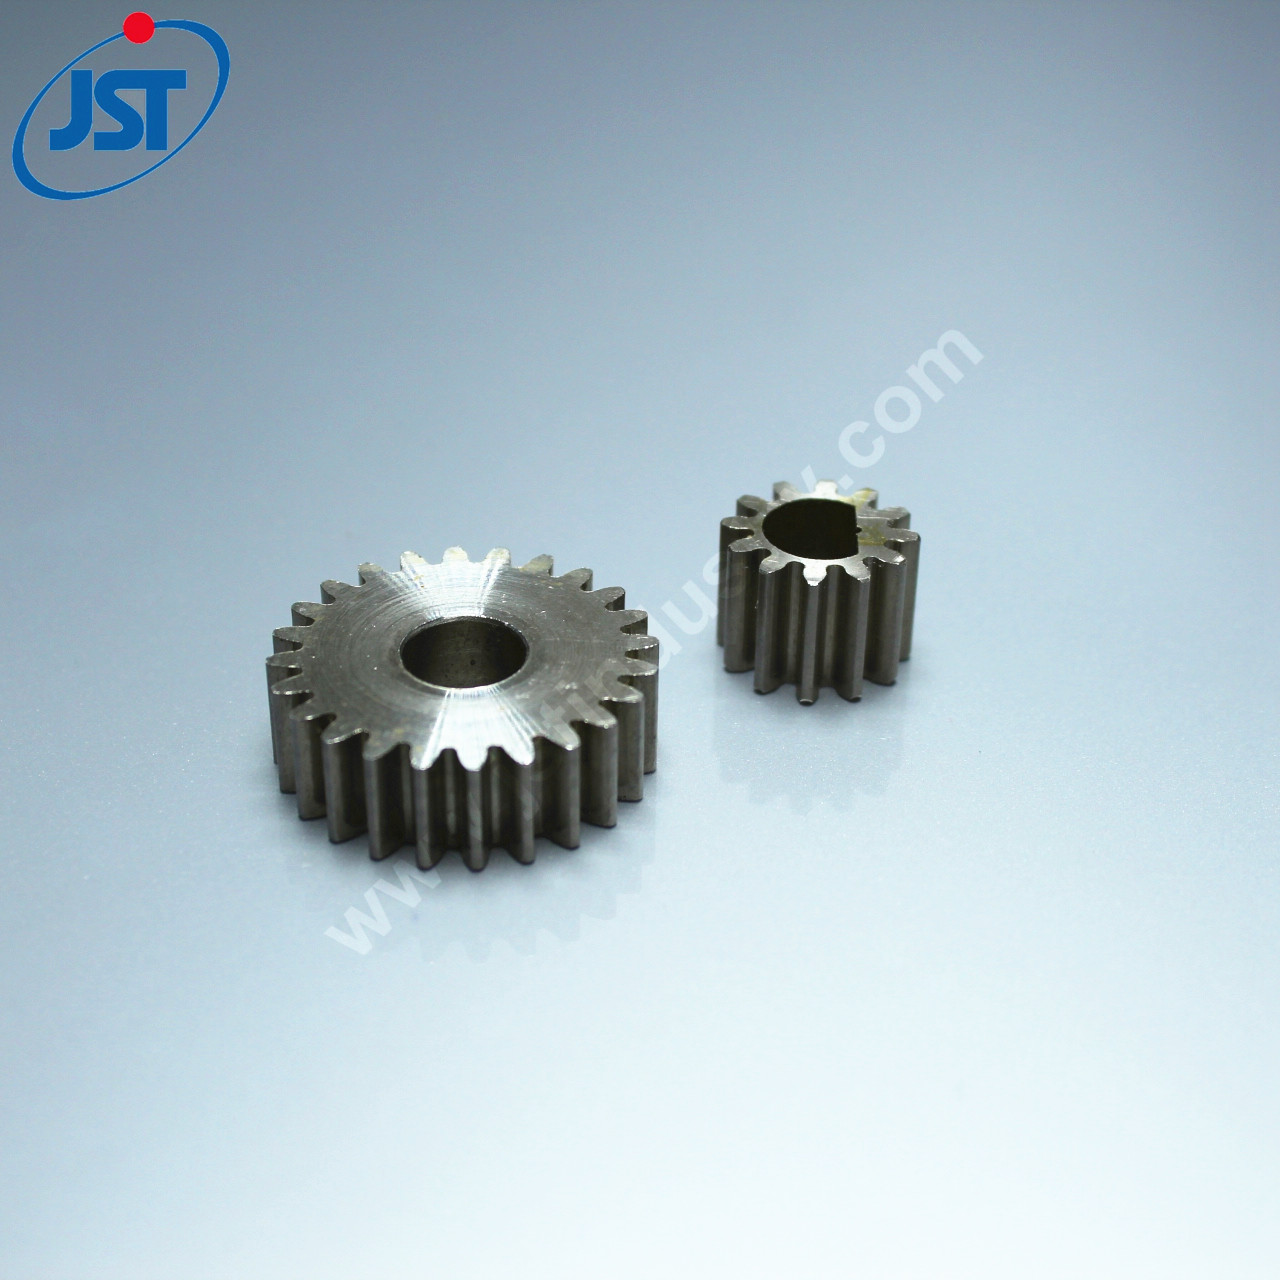 Customized Precision Stainless Steel Machining Parts 